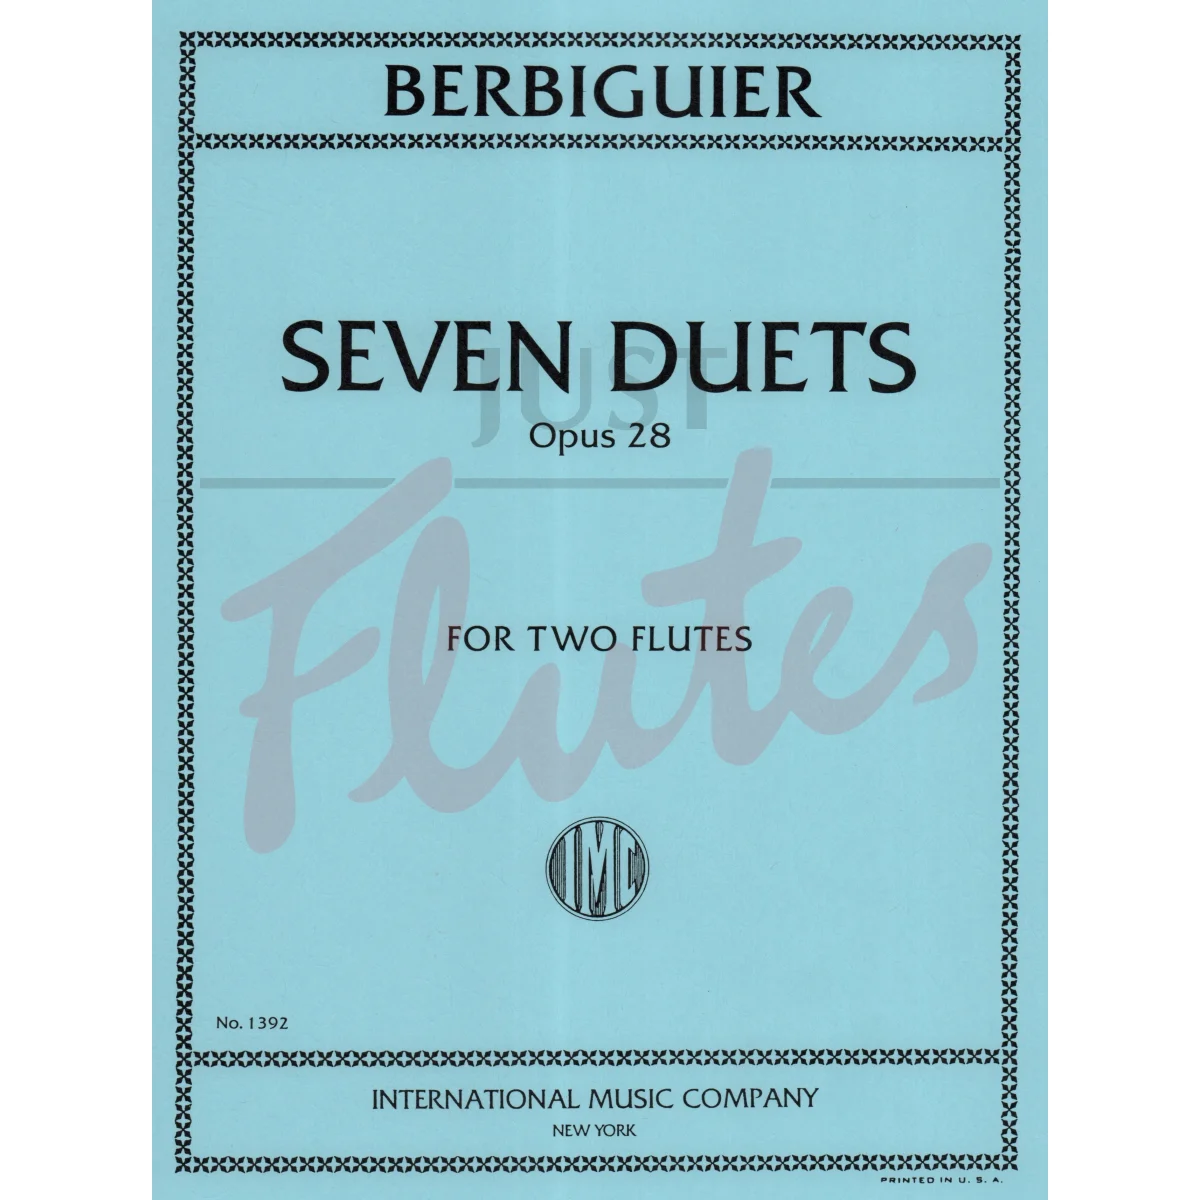 Seven Duets for Two Flutes